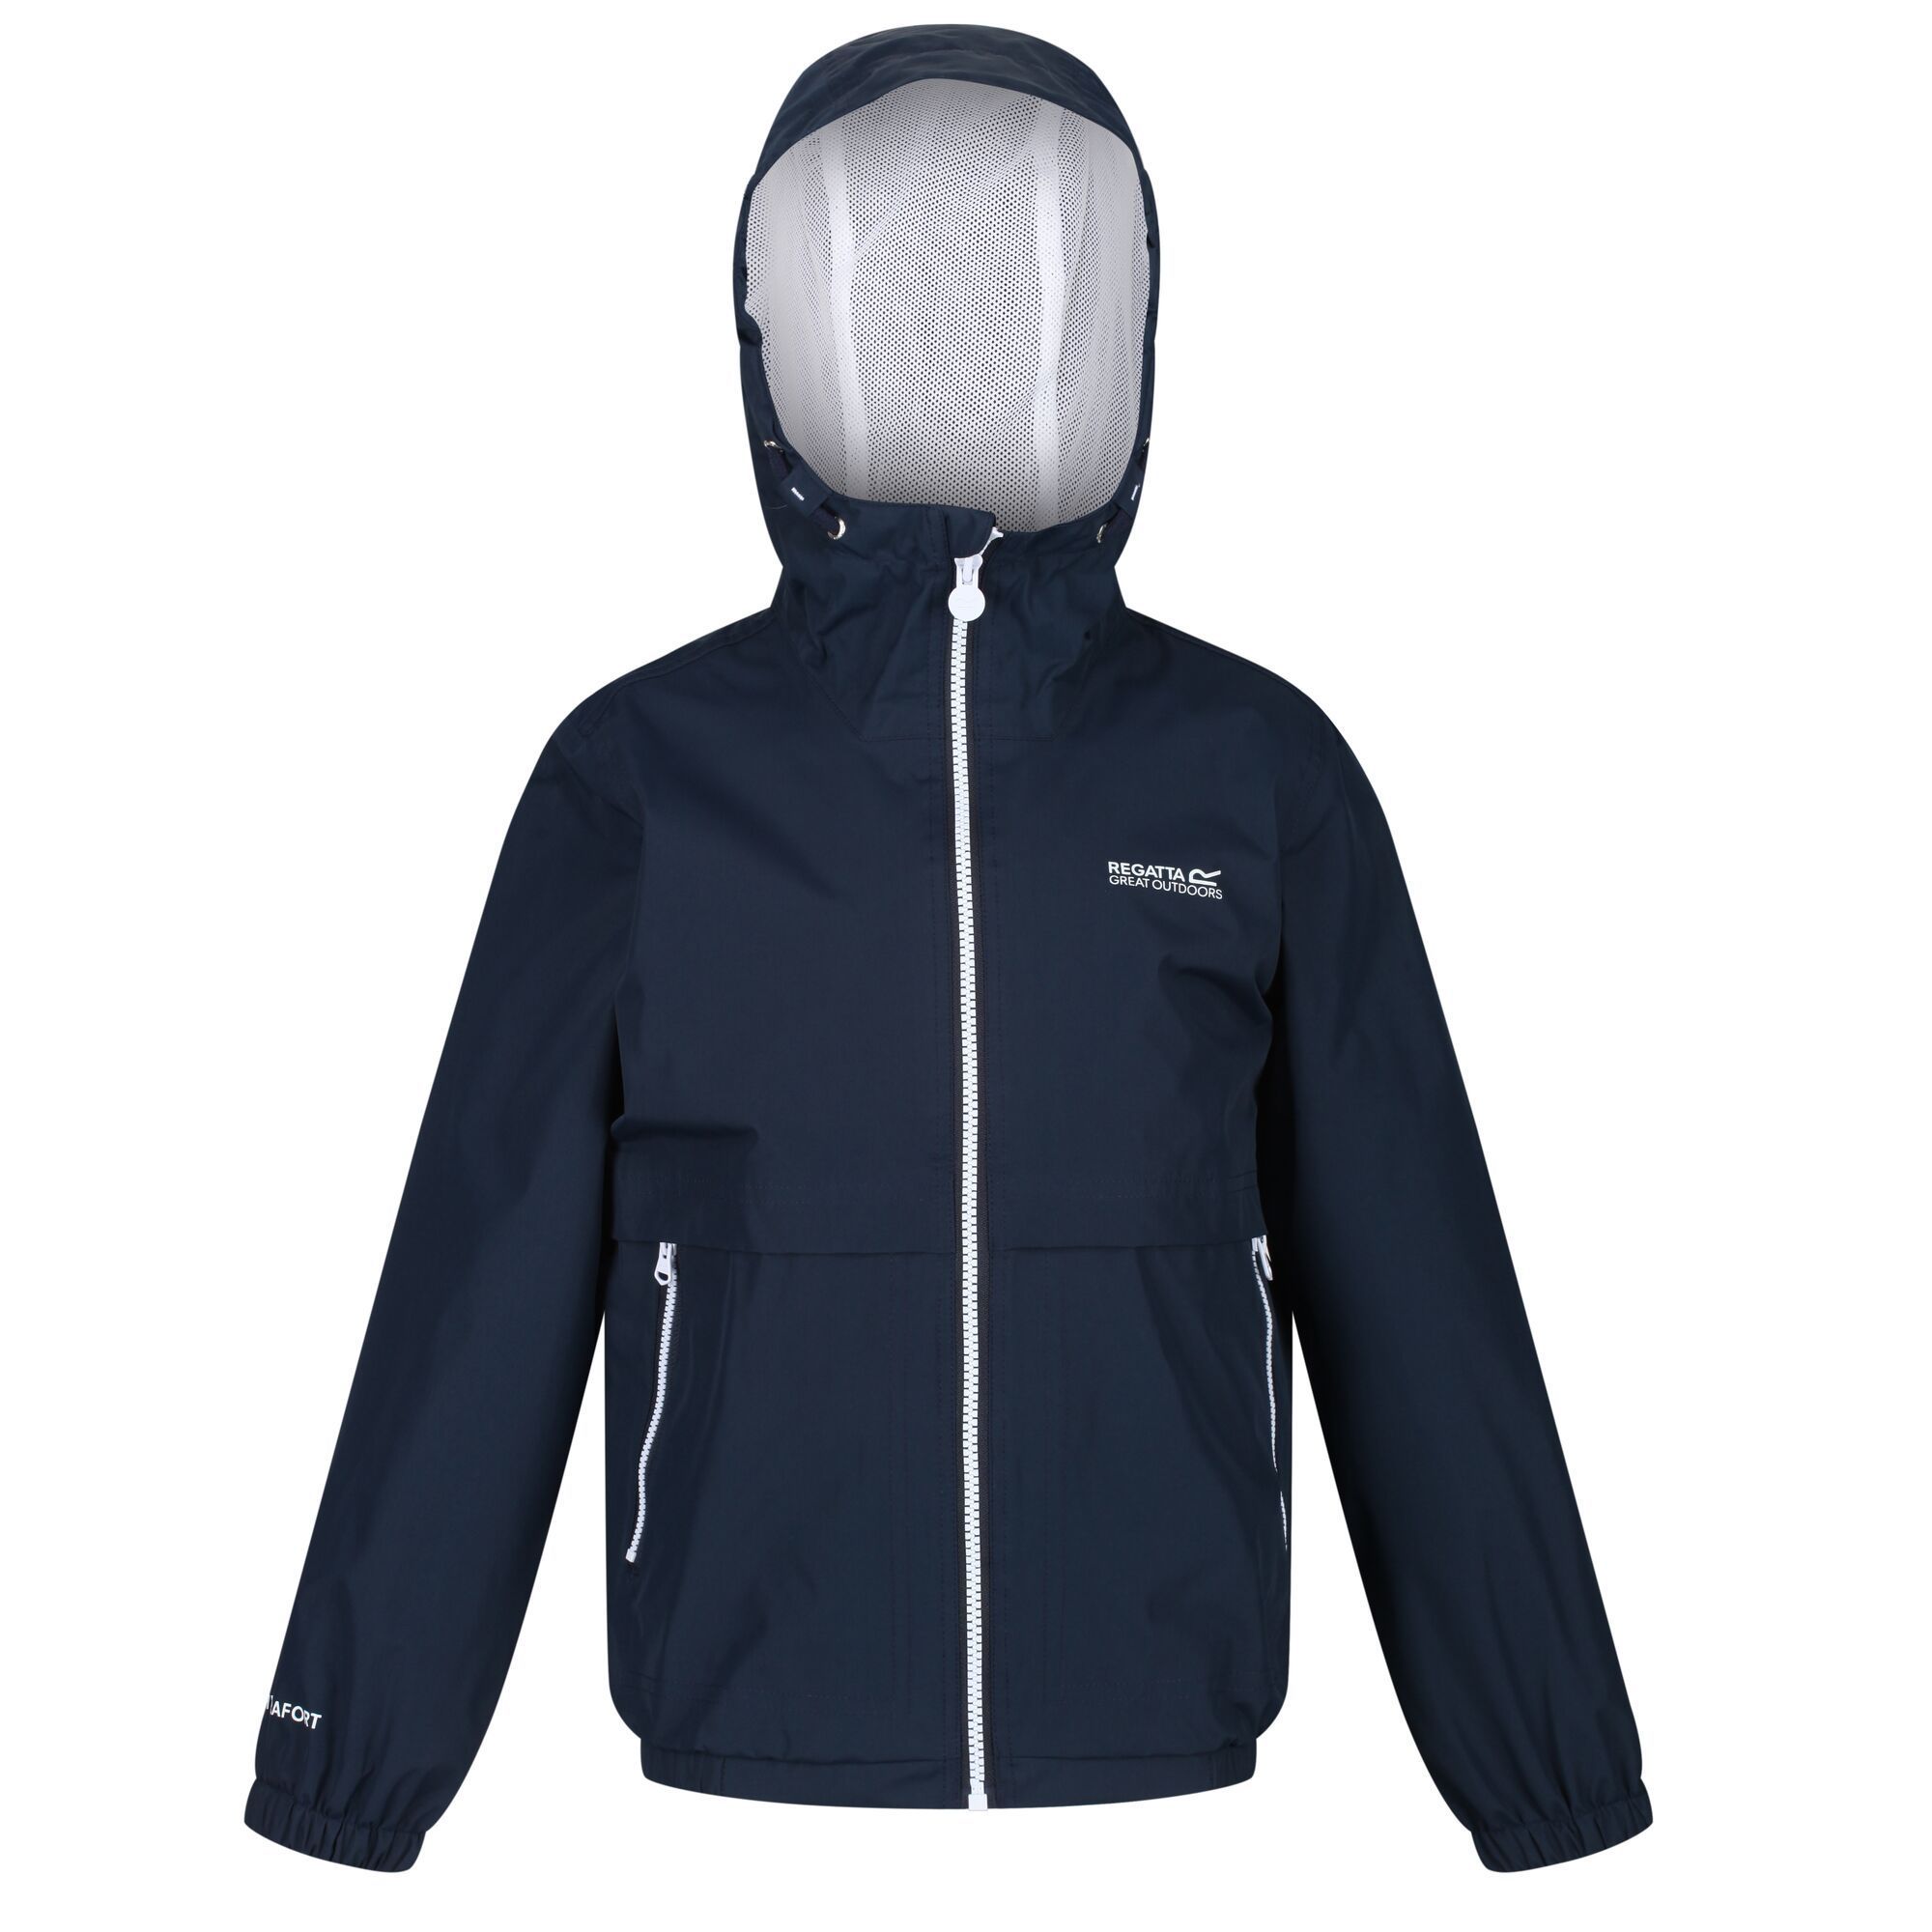 Material: 100% Polyester. Durable, water-repellent jacket with elasticated hood. Taped seams, elasticated hem and cuffs.  Part mesh, part polyester taffeta lining. 2 zipped lower pockets. Regatta outdoors logo print on the chest.